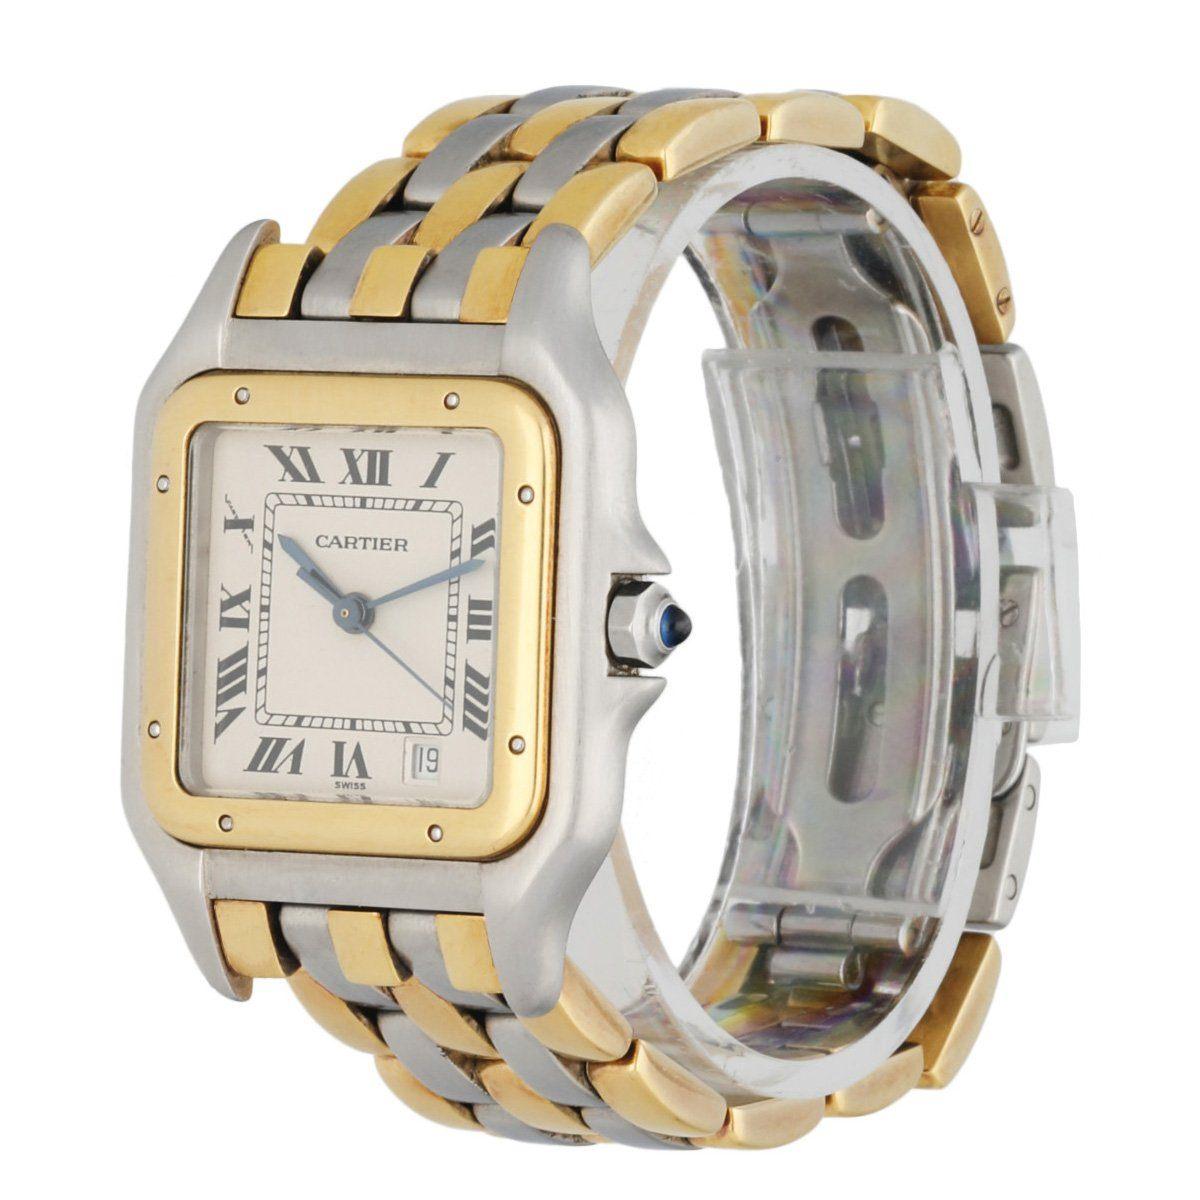 Cartier Panthere 187949 Midsize Ladies Watch. 27mm stainless steel case with an 18k yellow gold bezel. Off white dial with blue steel hands and black roman numeral hour markers. Date display at the 5 o'clock position. Stainless steel with three rows